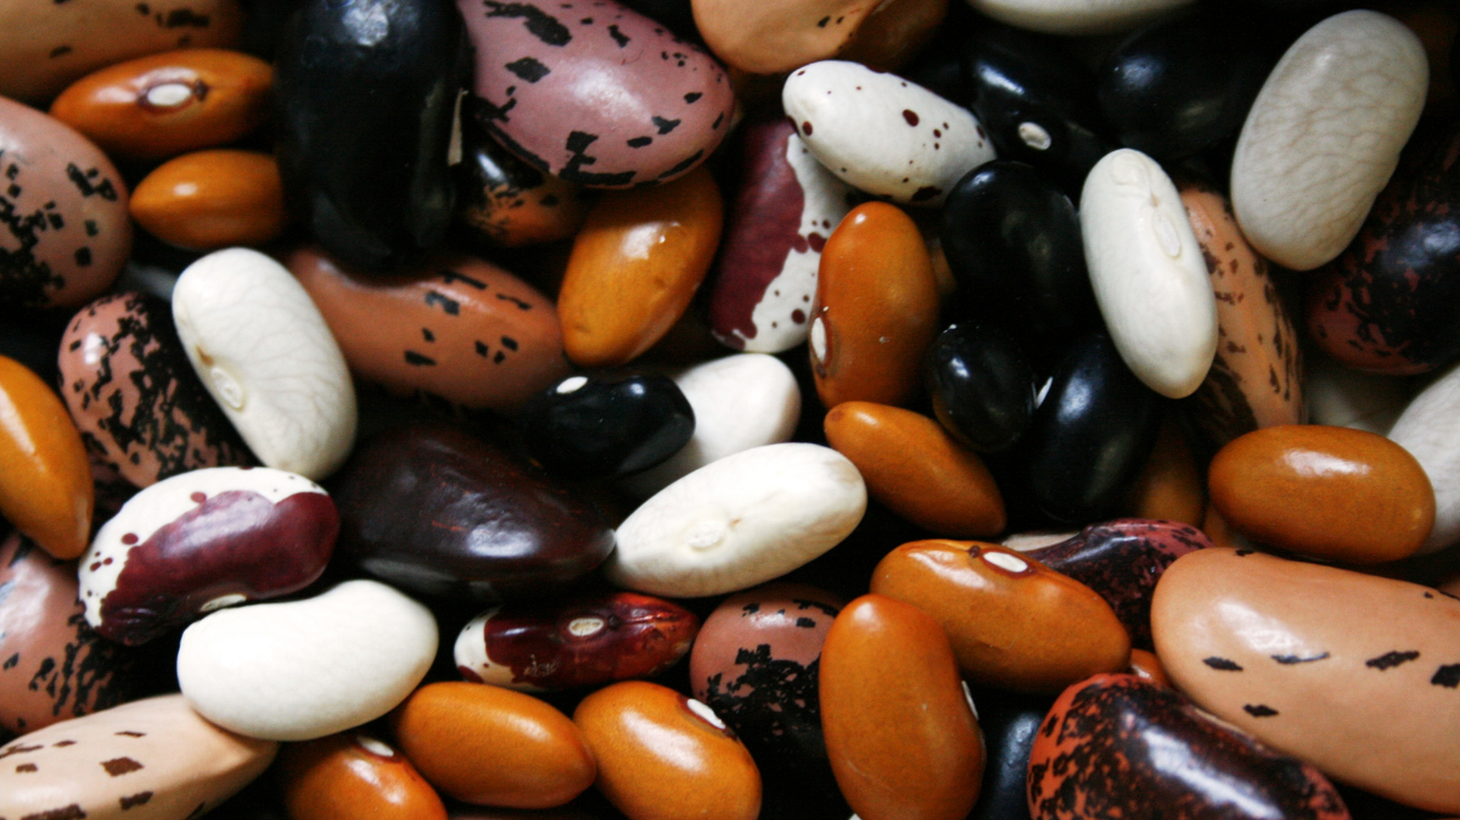 Beans come in many shapes, sizes and colors each with a distinctive flavor and texture.